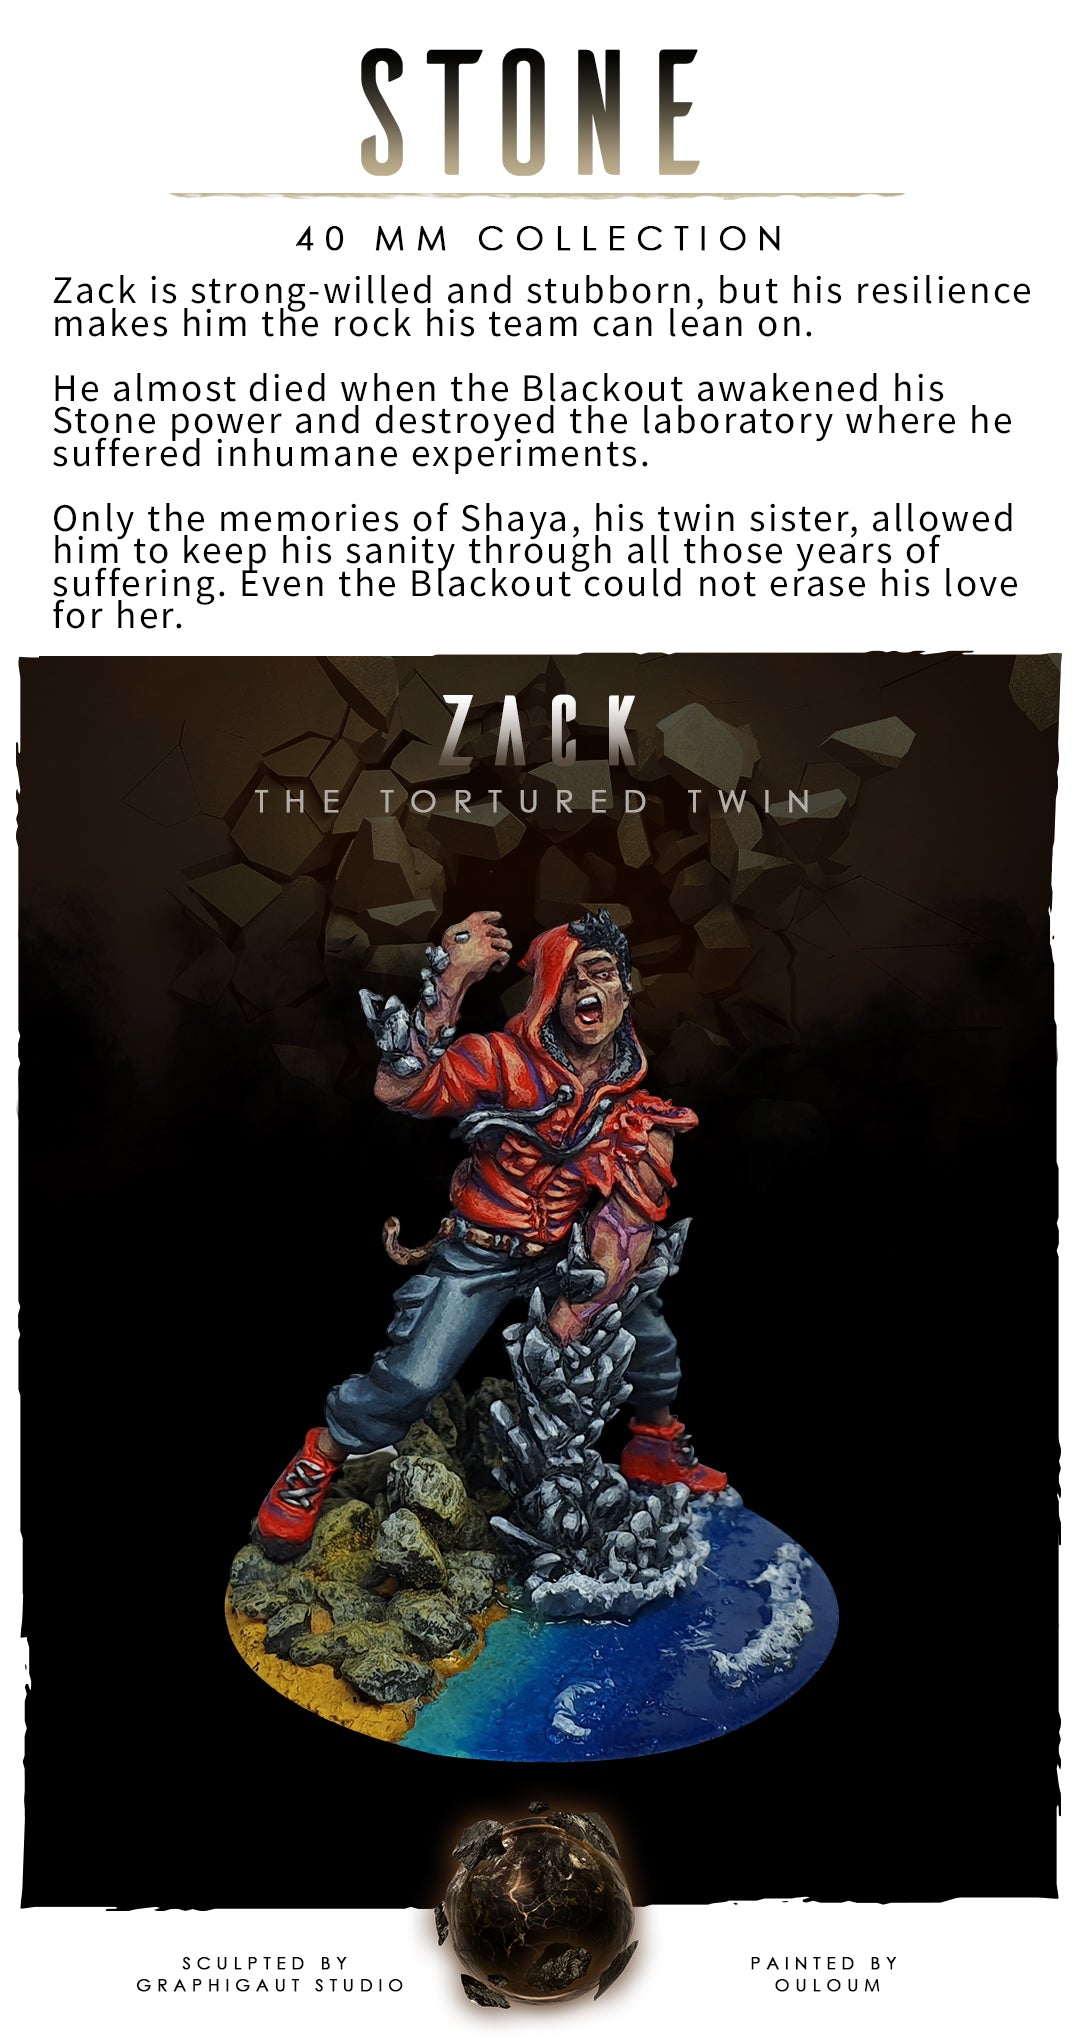 Zack : The Tortured Twin